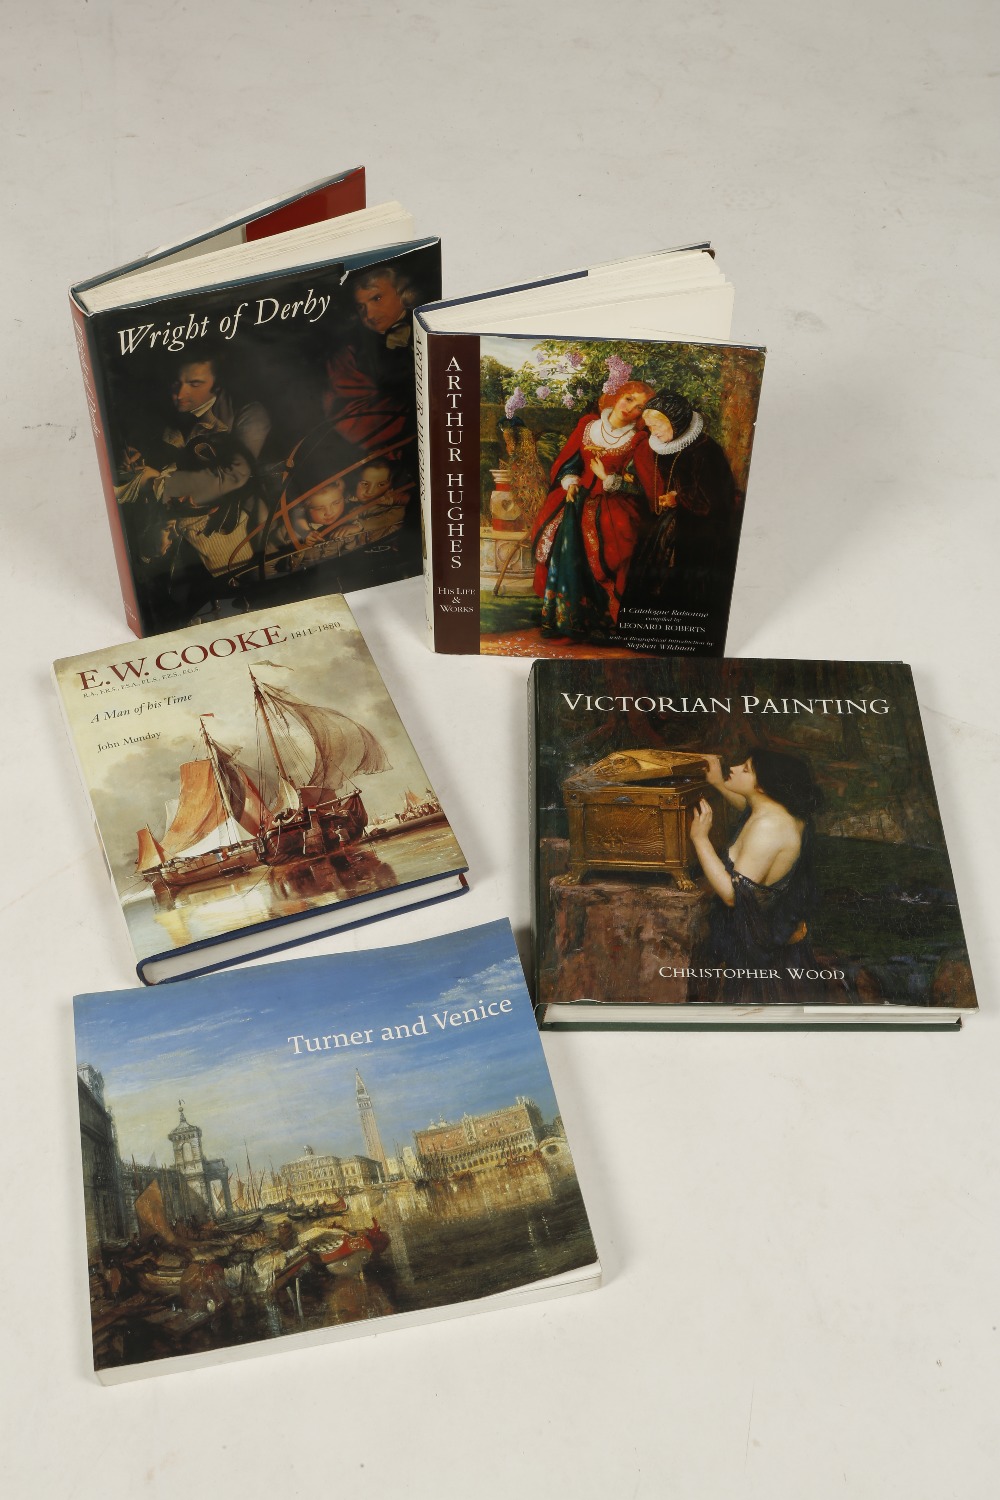 A COLLECTION OF ART BOOKS including "Victorian Painting" by Christopher Wood, "Turner and the